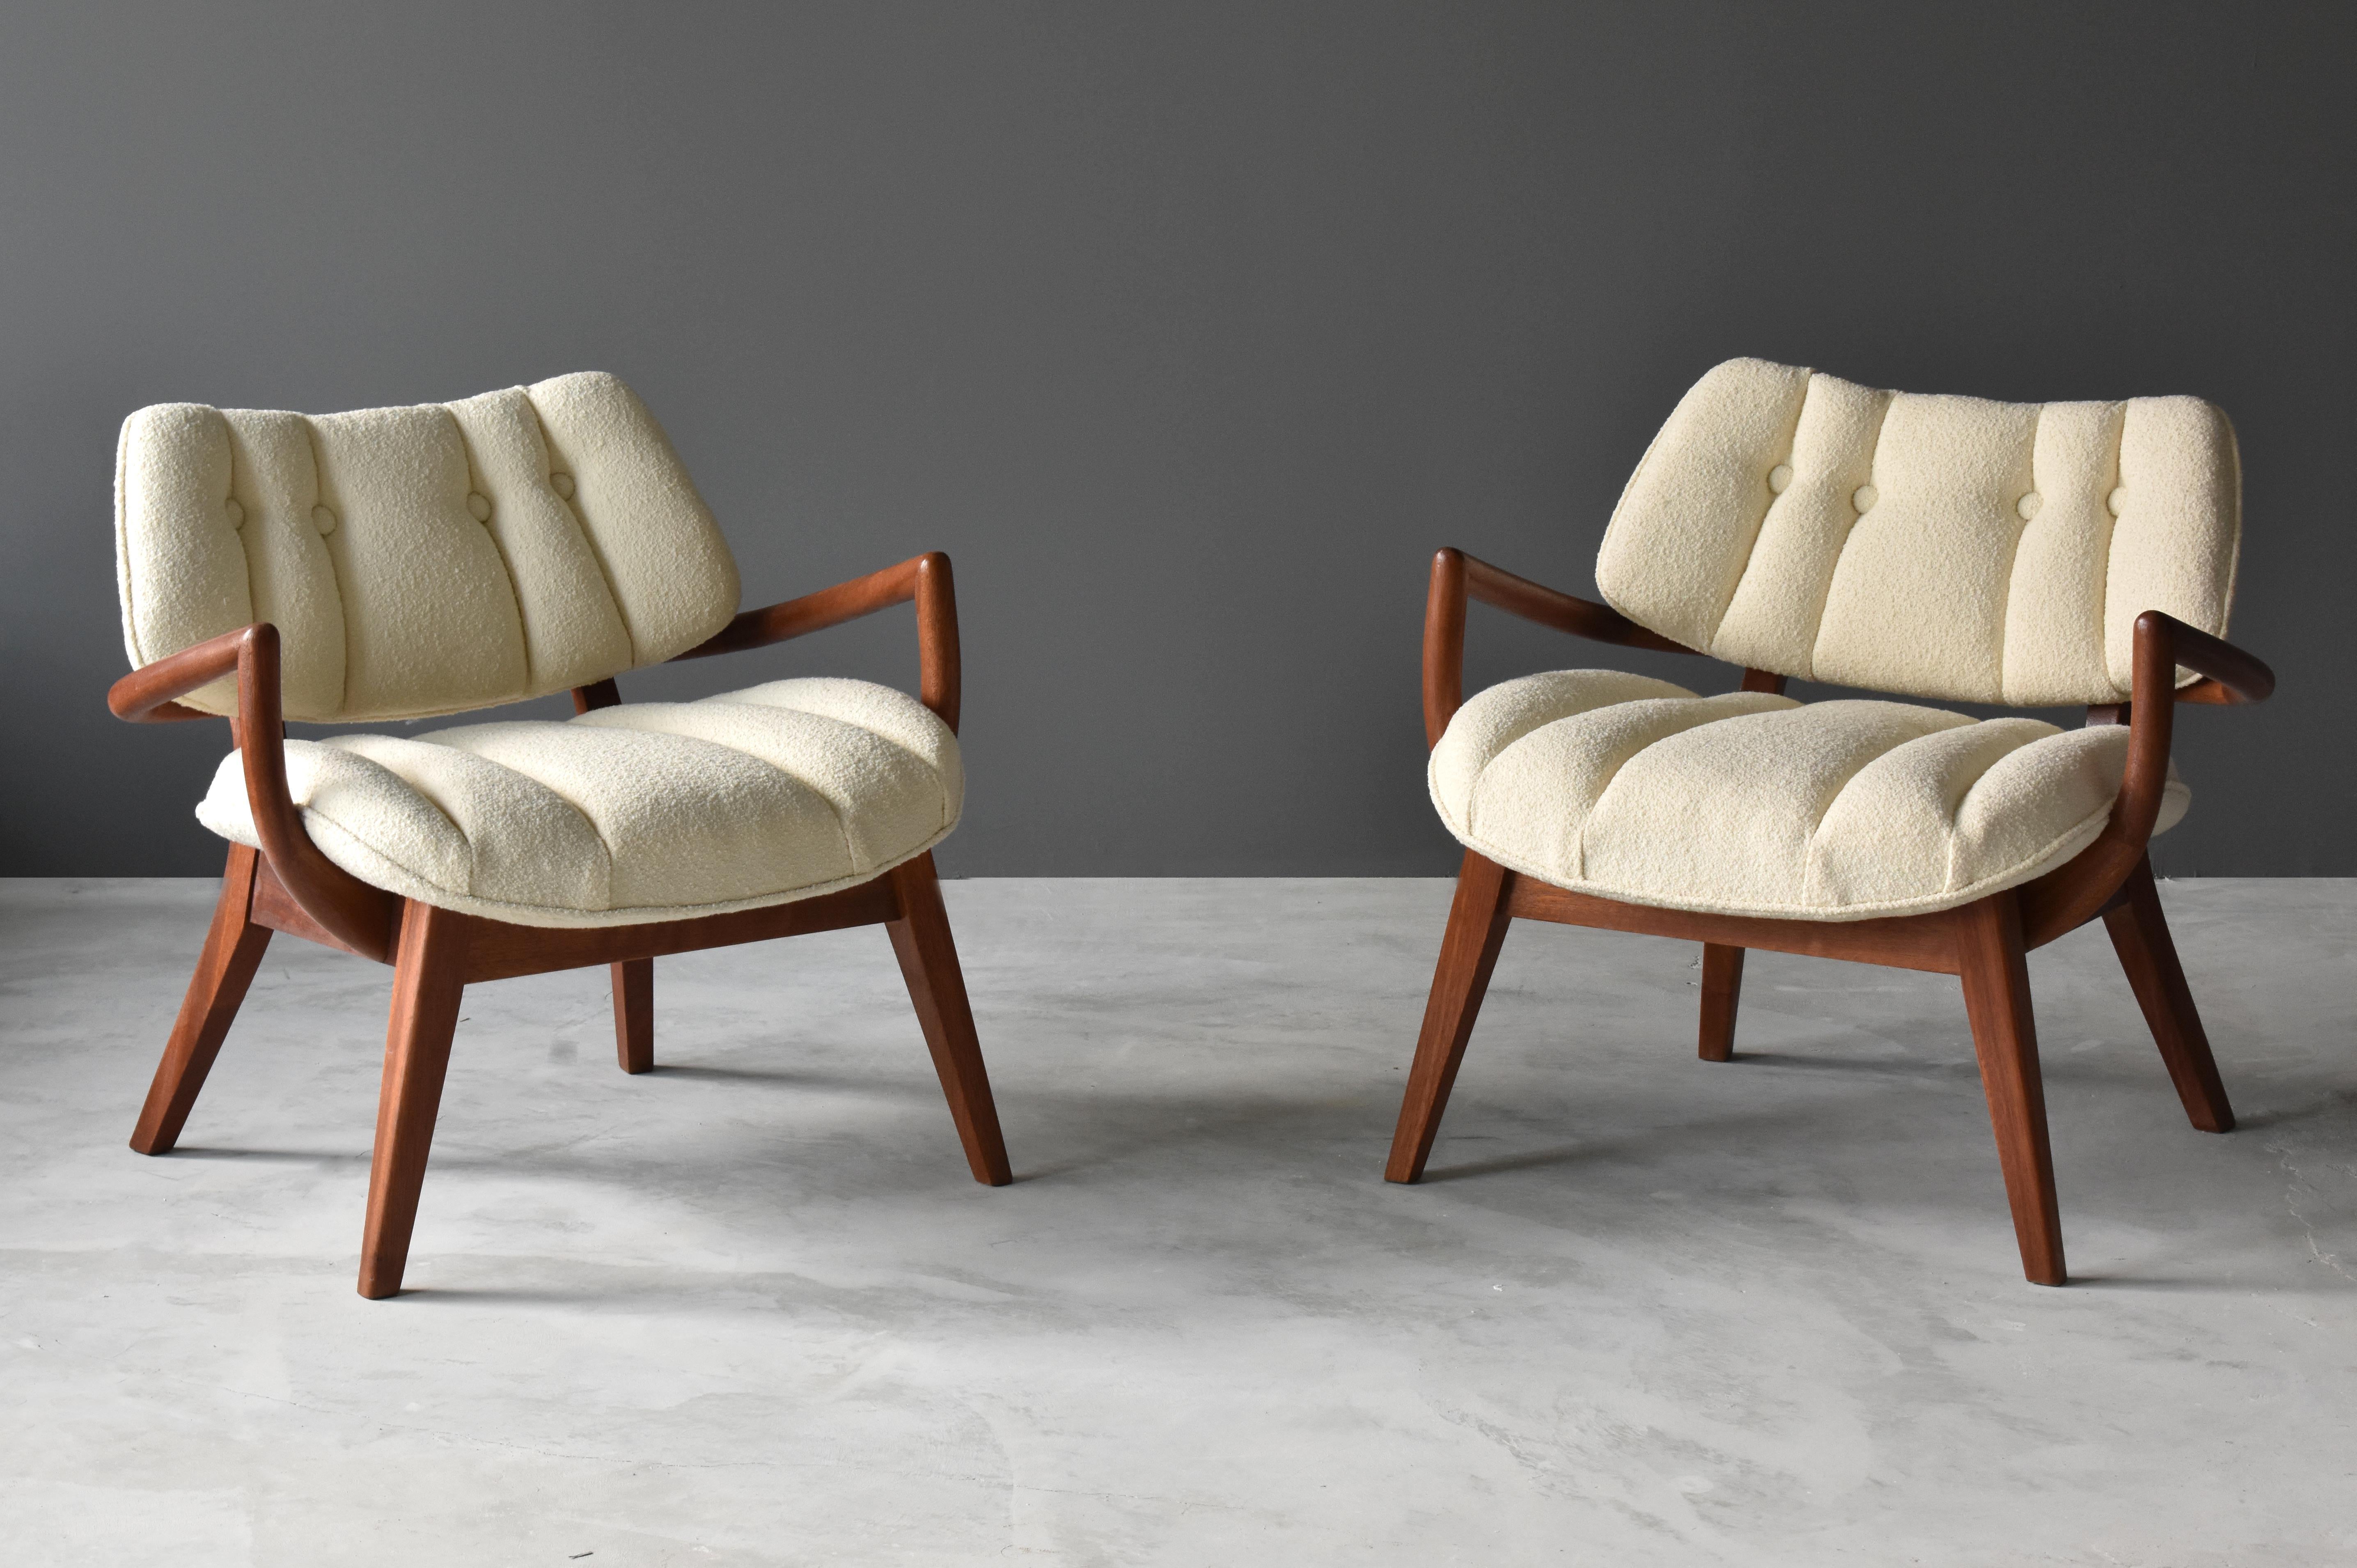 A pair of modernist lounge chairs attributed to Paul László. Soft and tufted overstuffed seat and back is mounted on stained mahogany frames with splayed legs. 

Other American designers include Paul Frankl, Edward Wormley, George Nakashima, Isamu